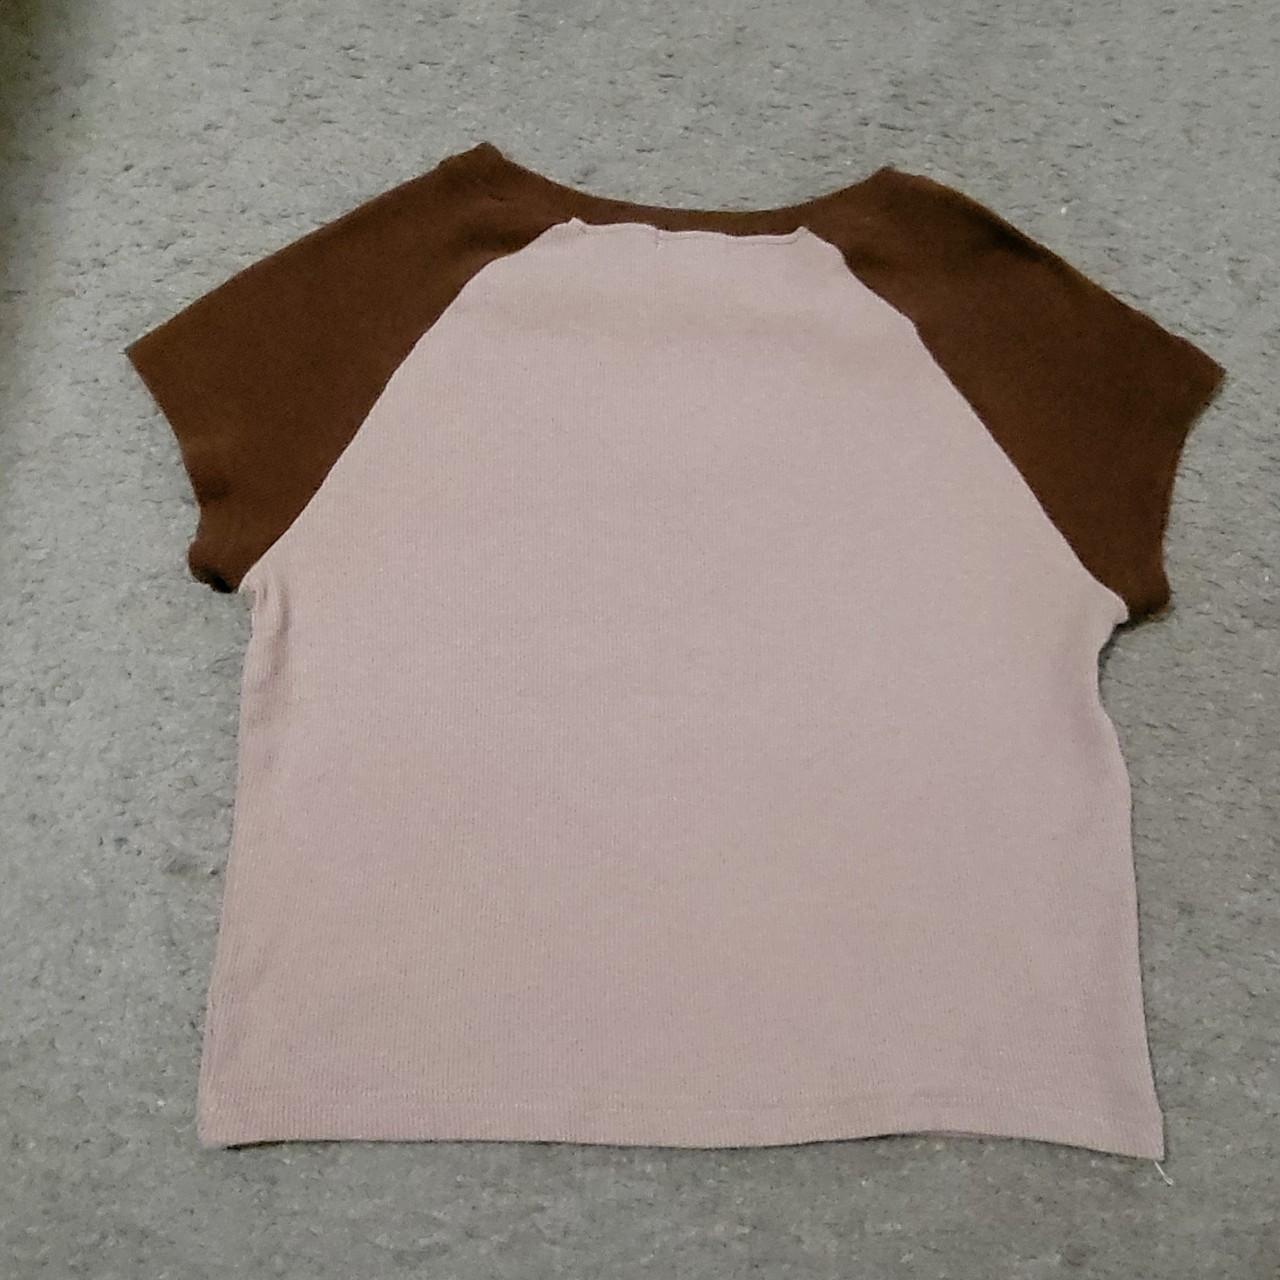 Rue 21 Women's Brown and White Crop-top (2)